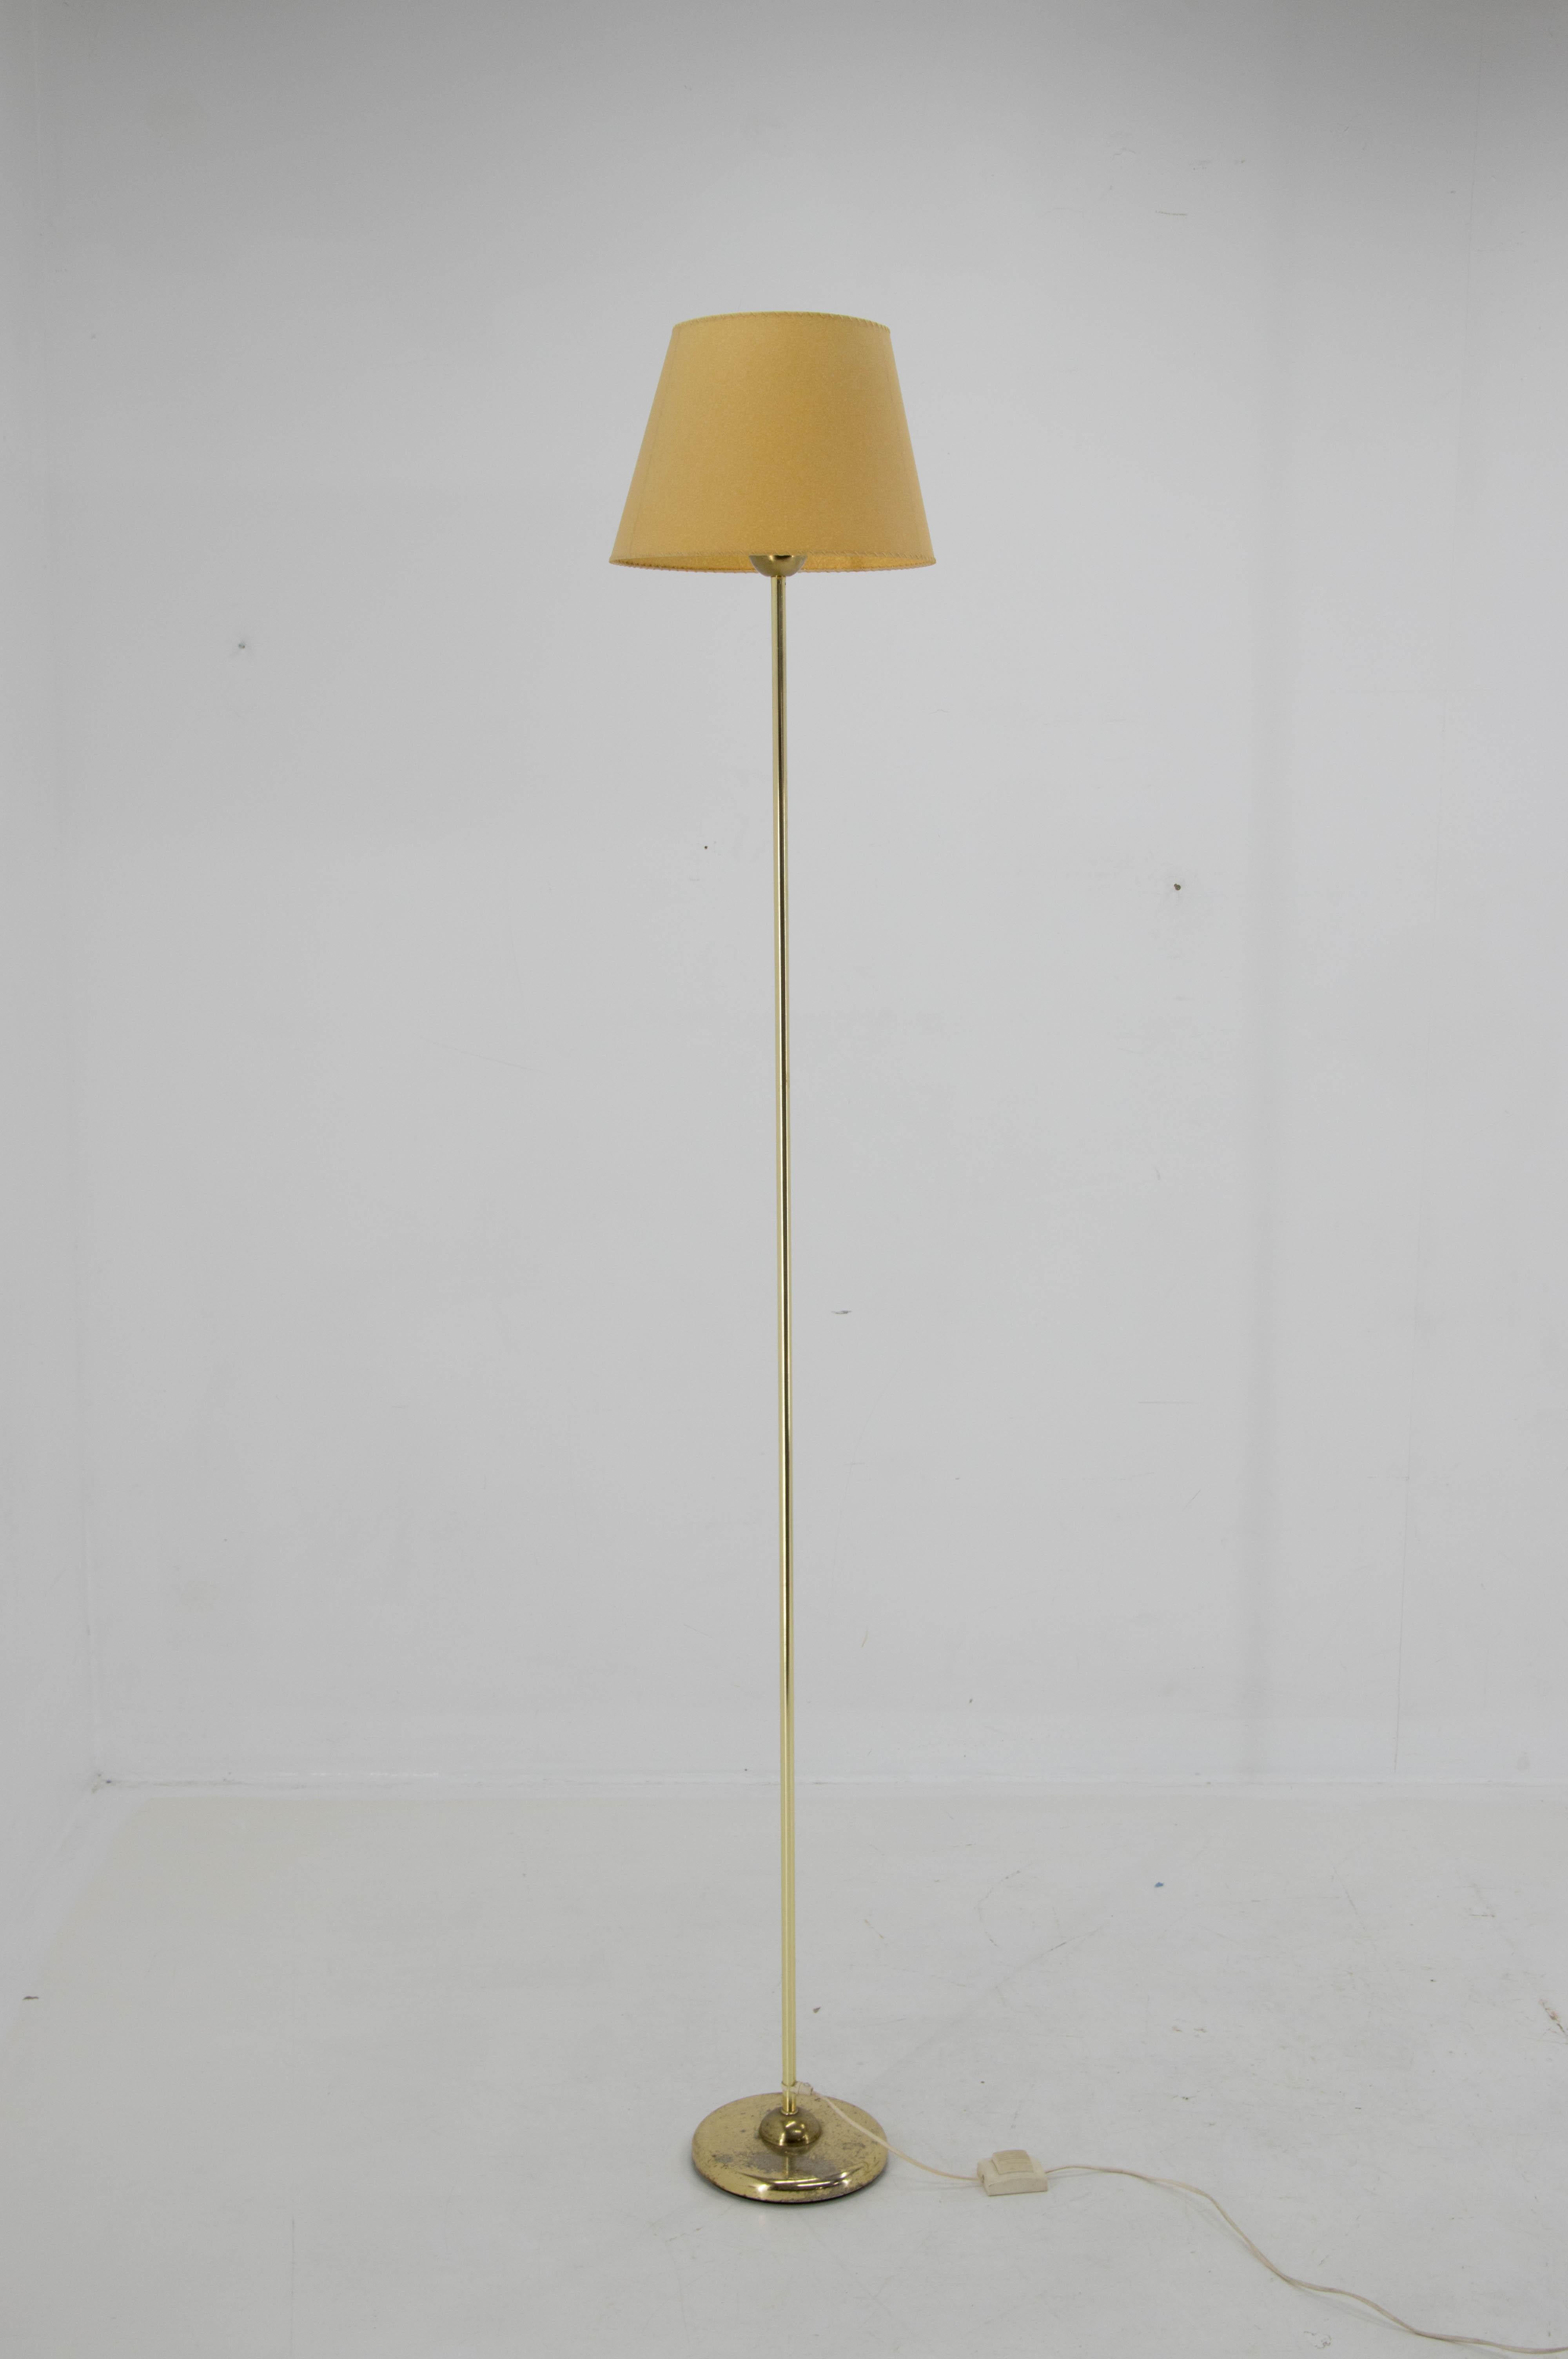 Very tall floor lamp by IKEA.
Estimated date of production: 1980s
Brass stand with nice age patina.
New parchment paper shade.
1x60W, E25-E27 bulb
Original foot switch.
US plug adapter included